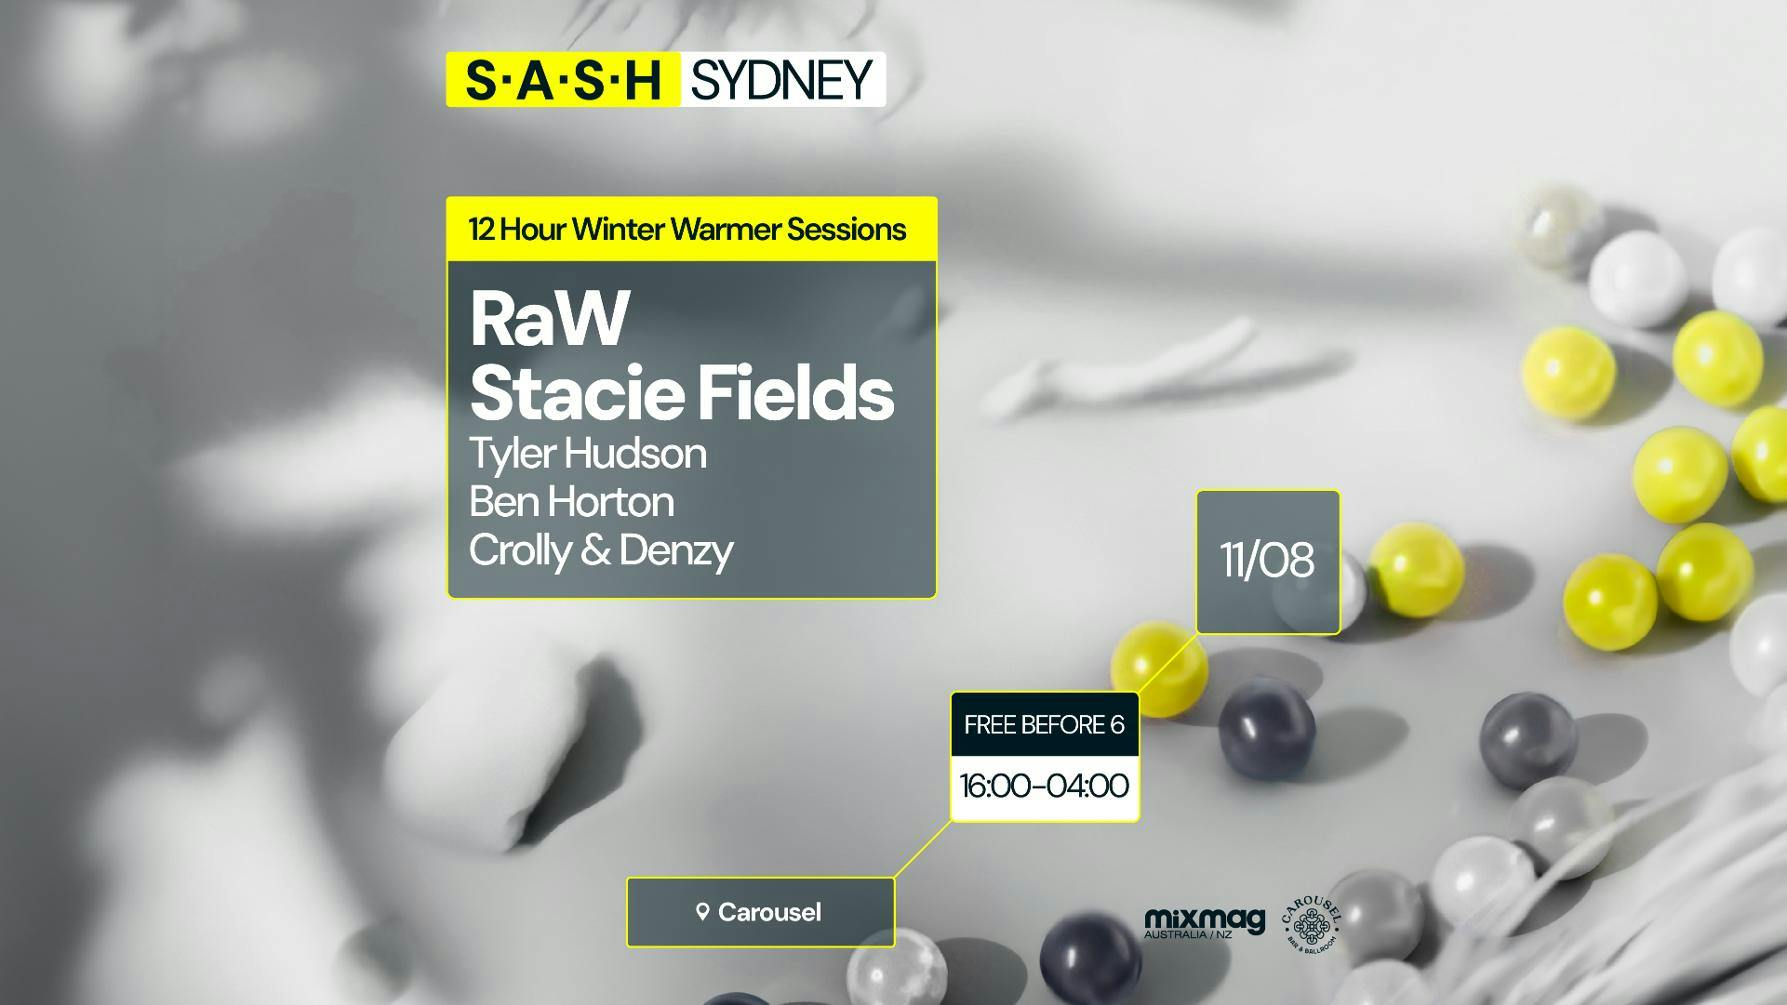 ★ S.A.S.H Sydney ★ Winter Warmer Sessions ★ Stacie Fields & RaW ★ Sun 11th August ★